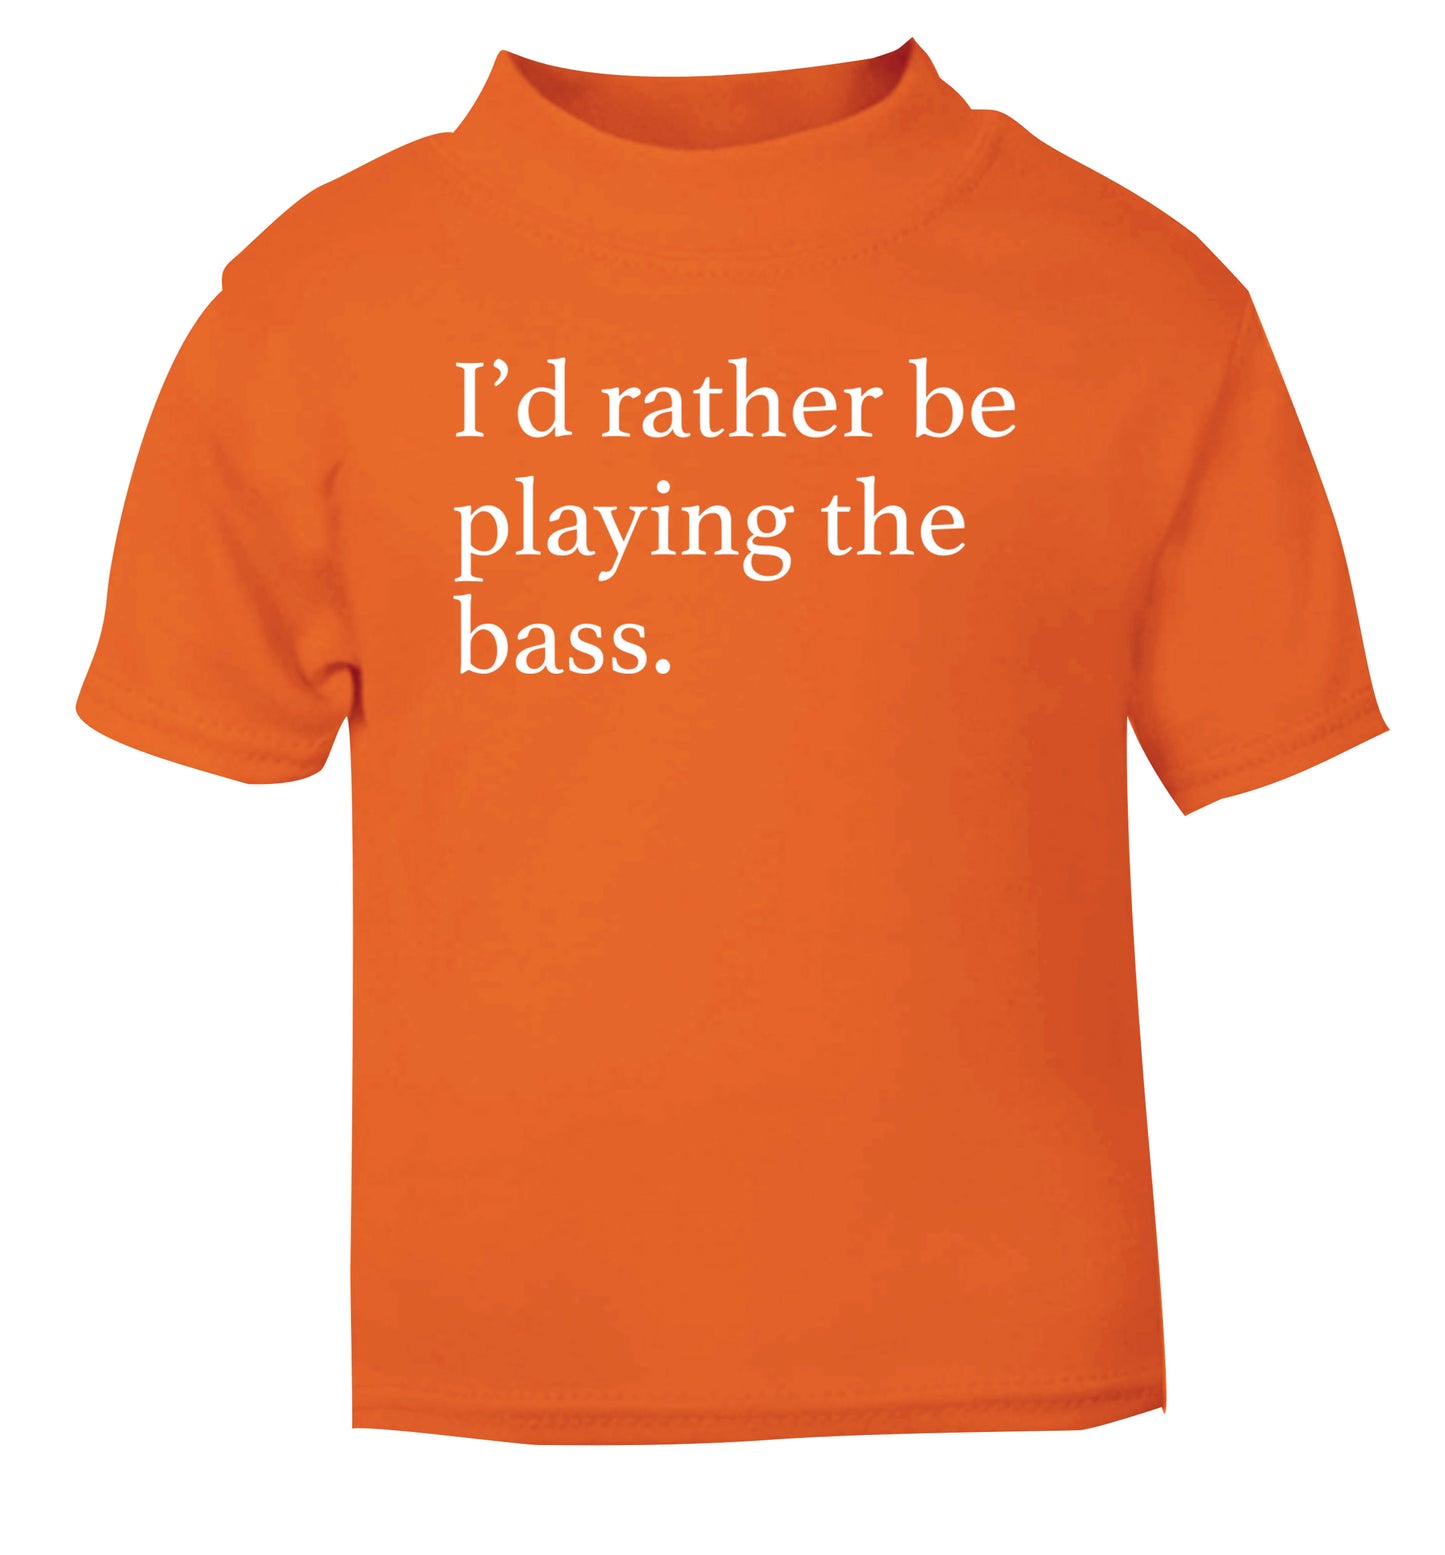 I'd rather by playing the bass orange Baby Toddler Tshirt 2 Years